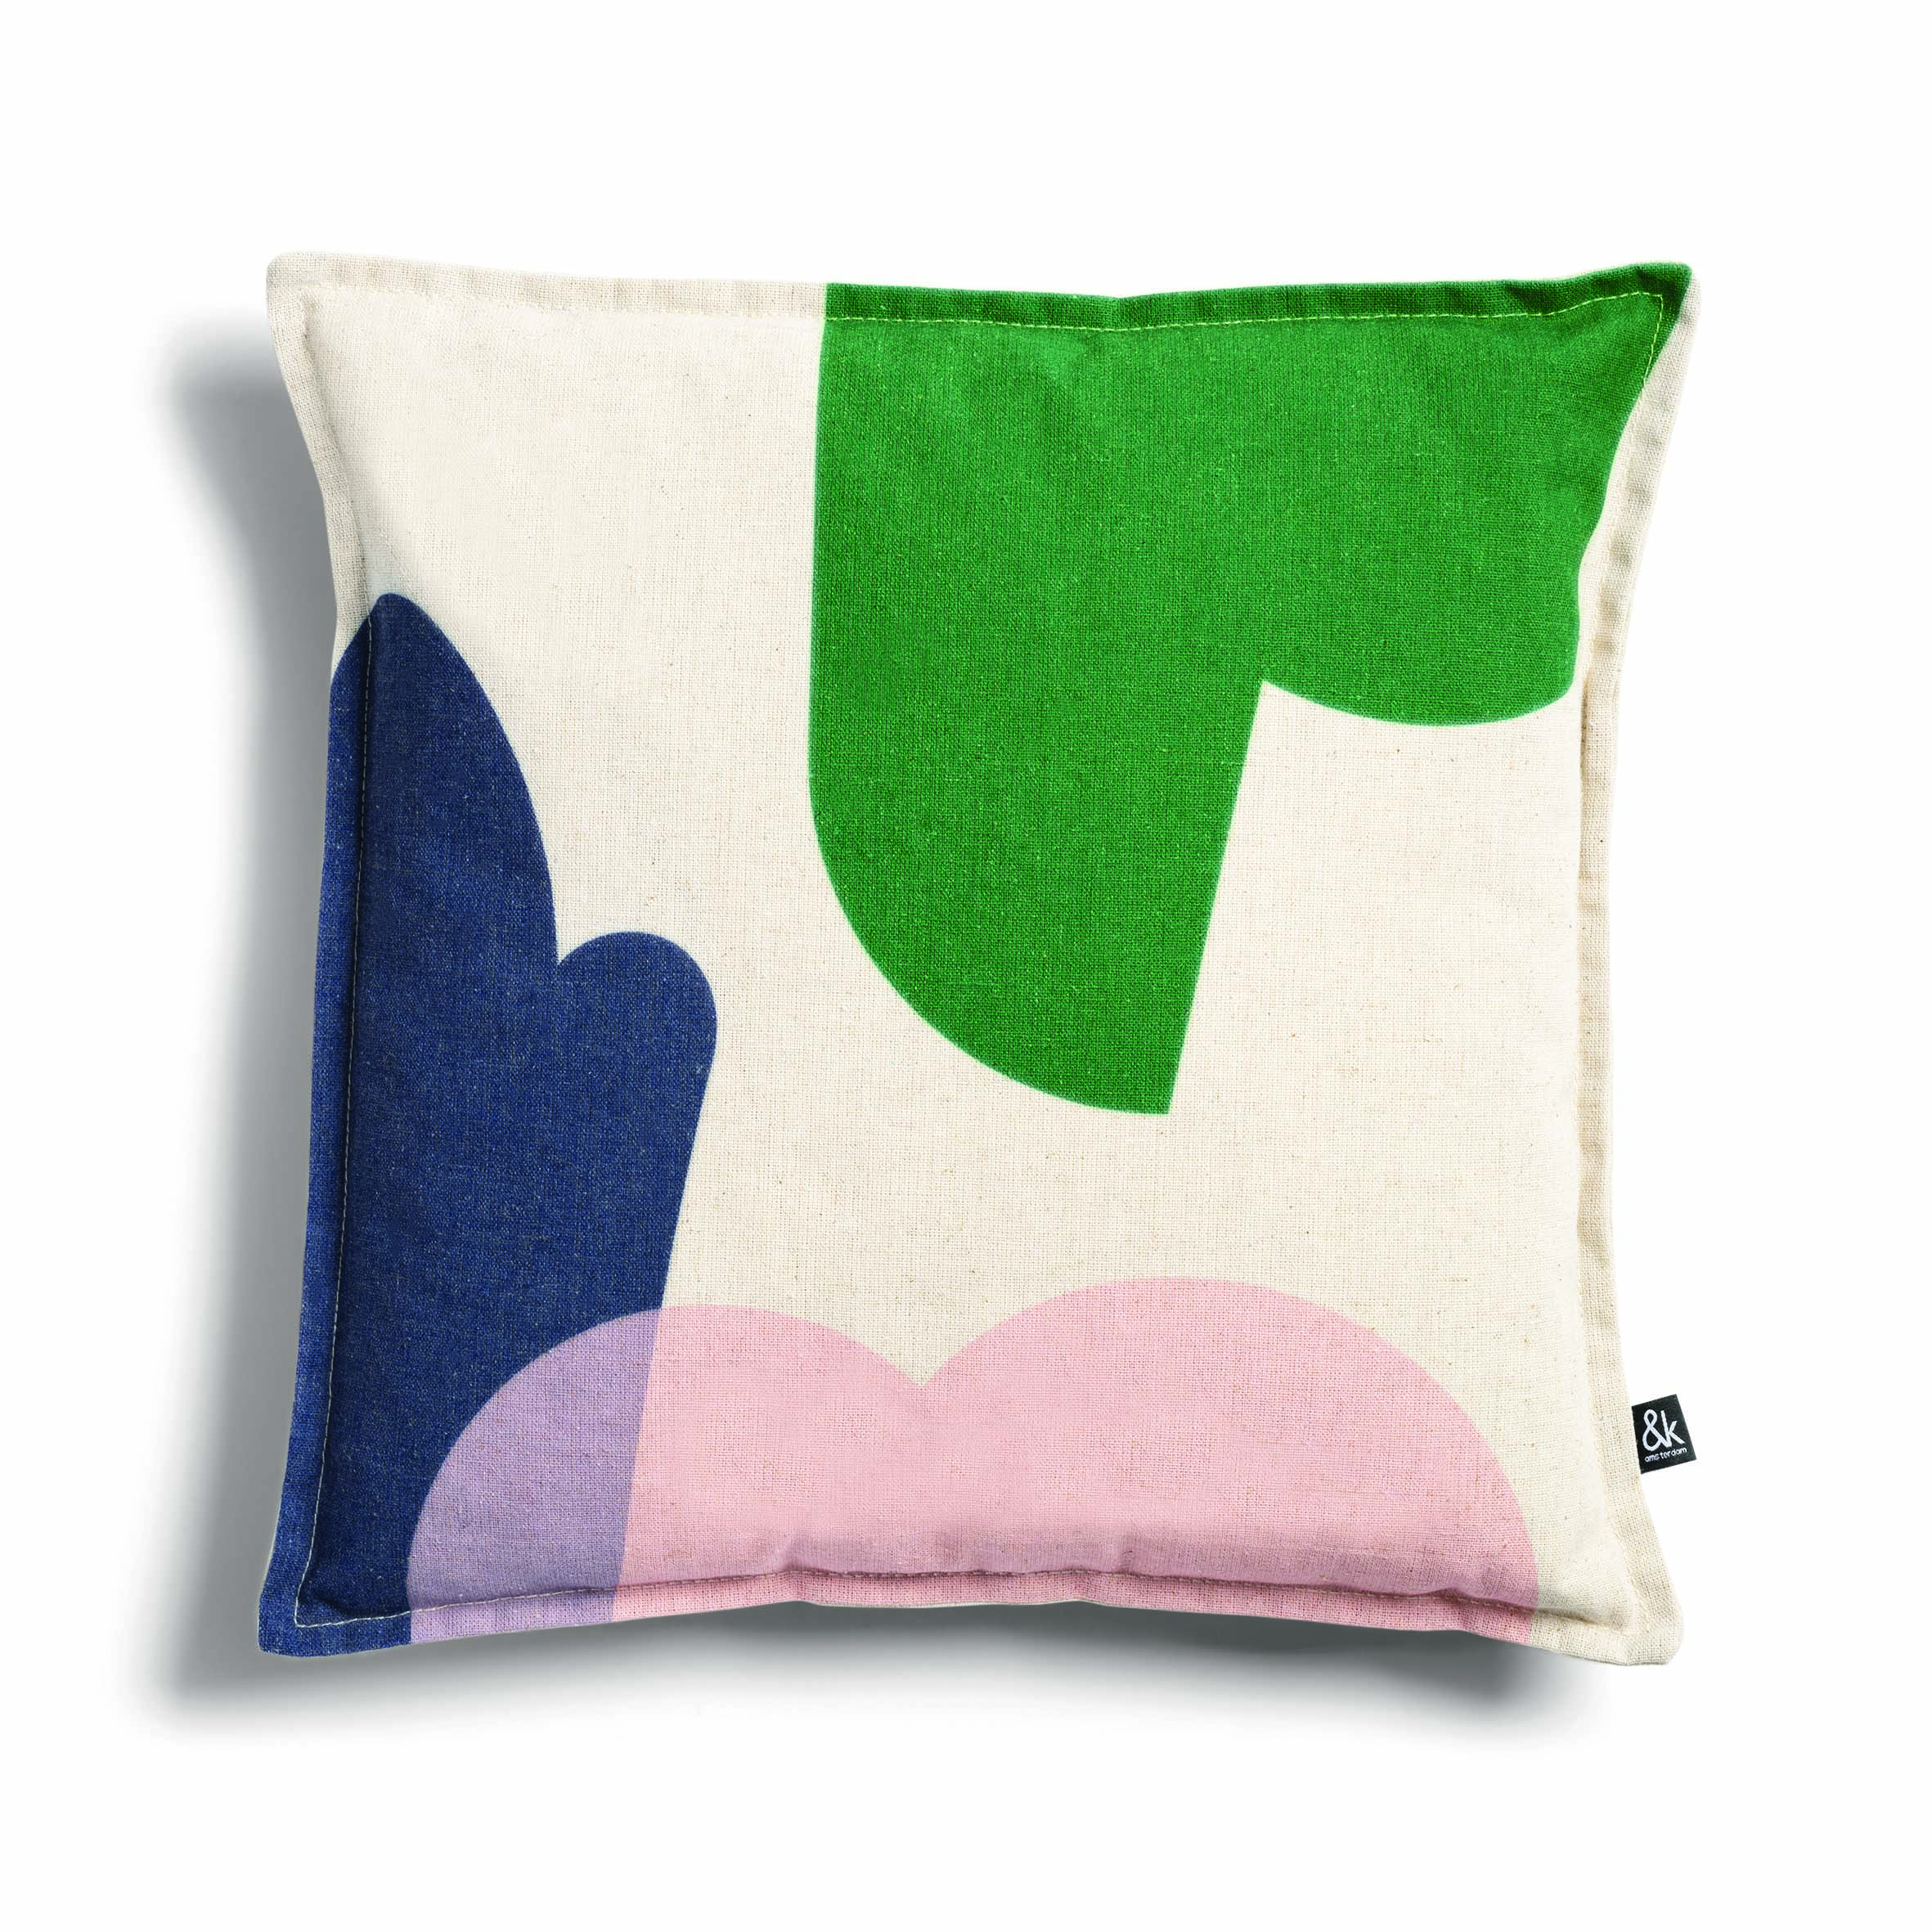 &klevering Cushion Collage Square Green